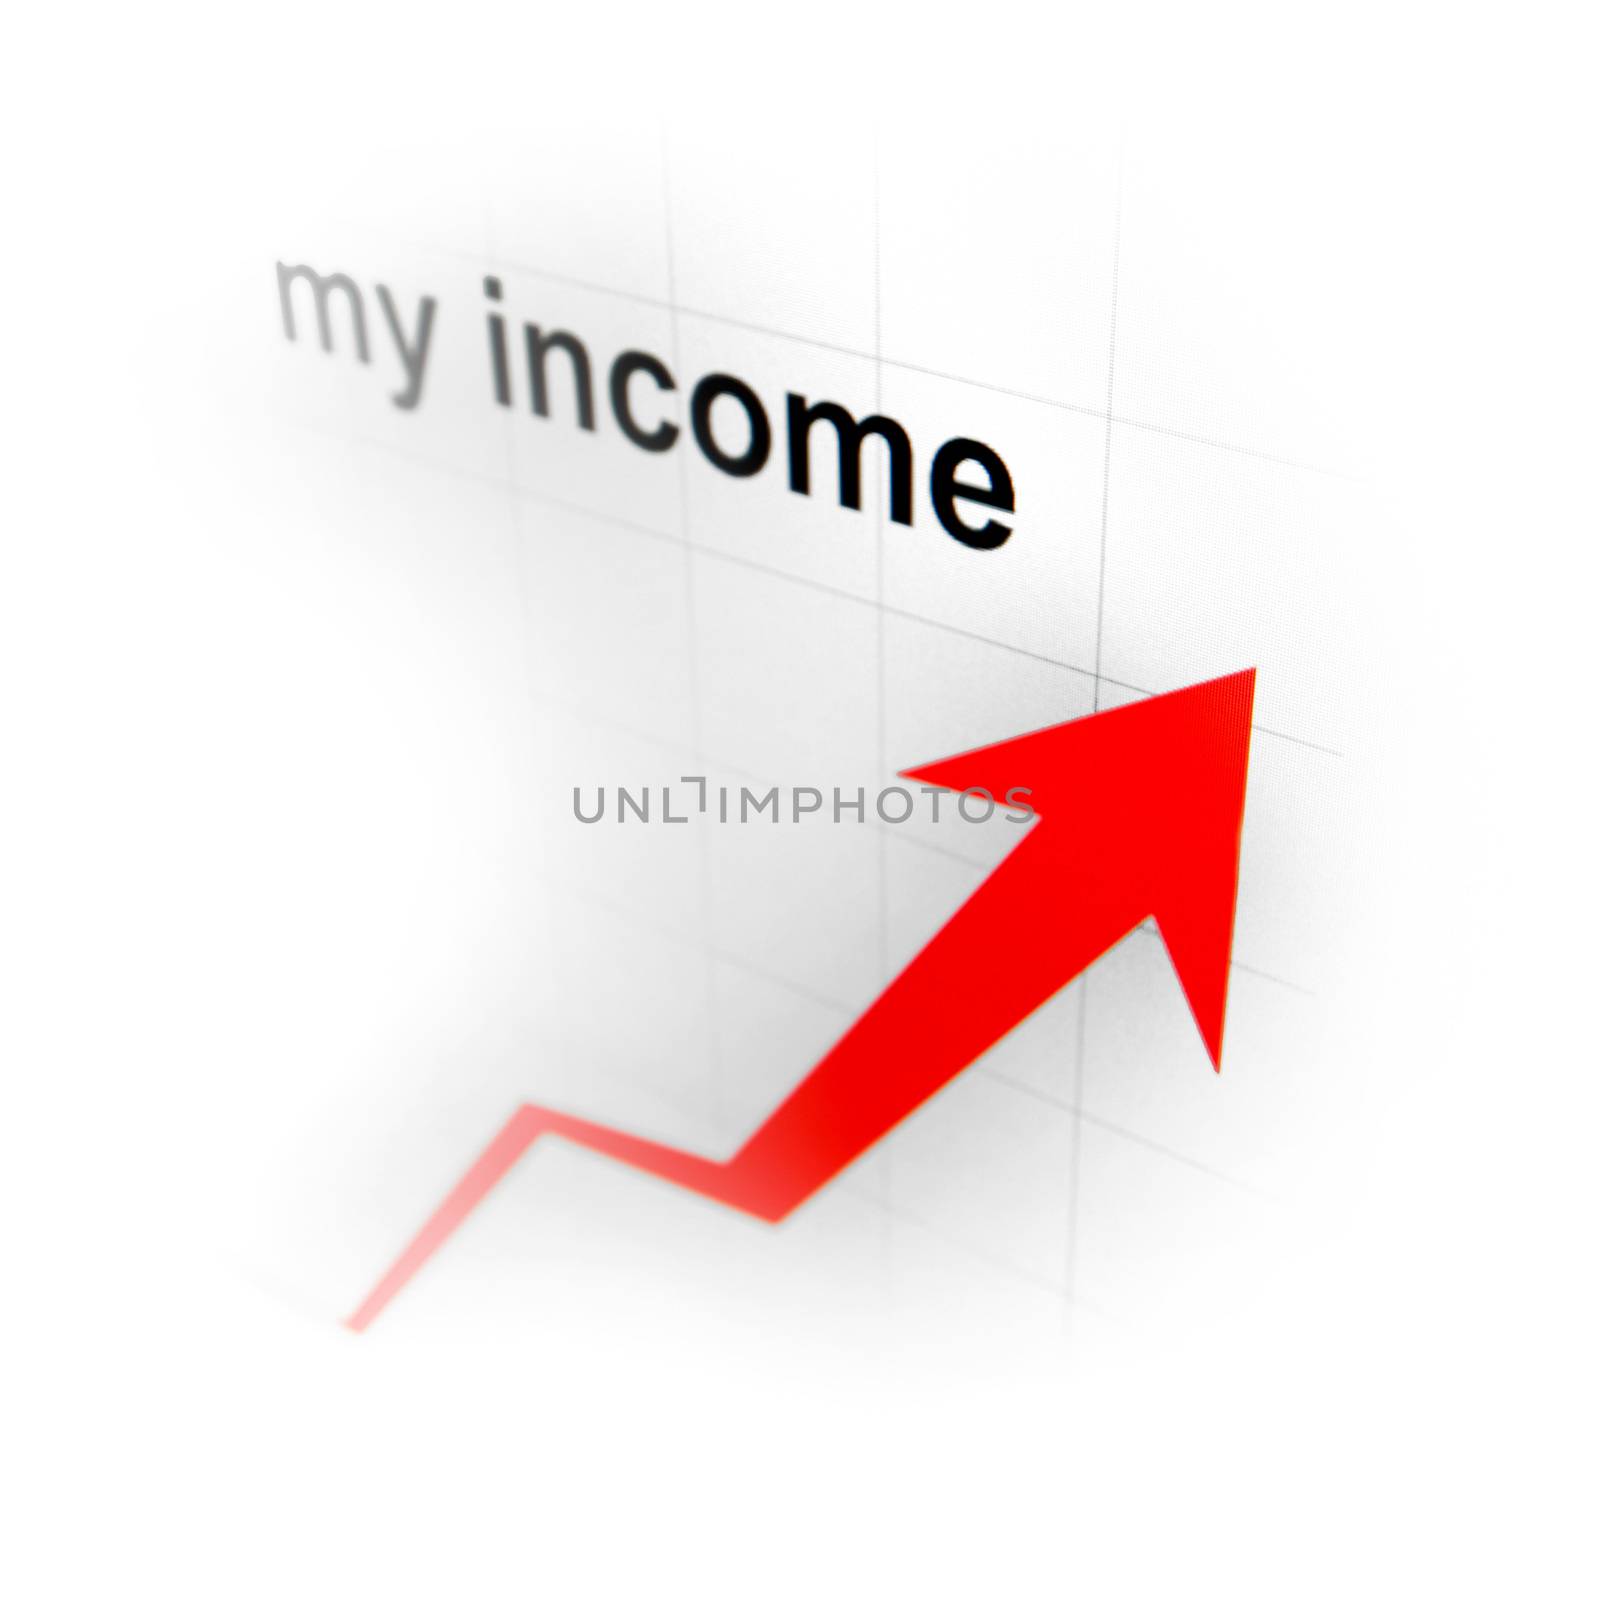 Arrow graph of my income on white background